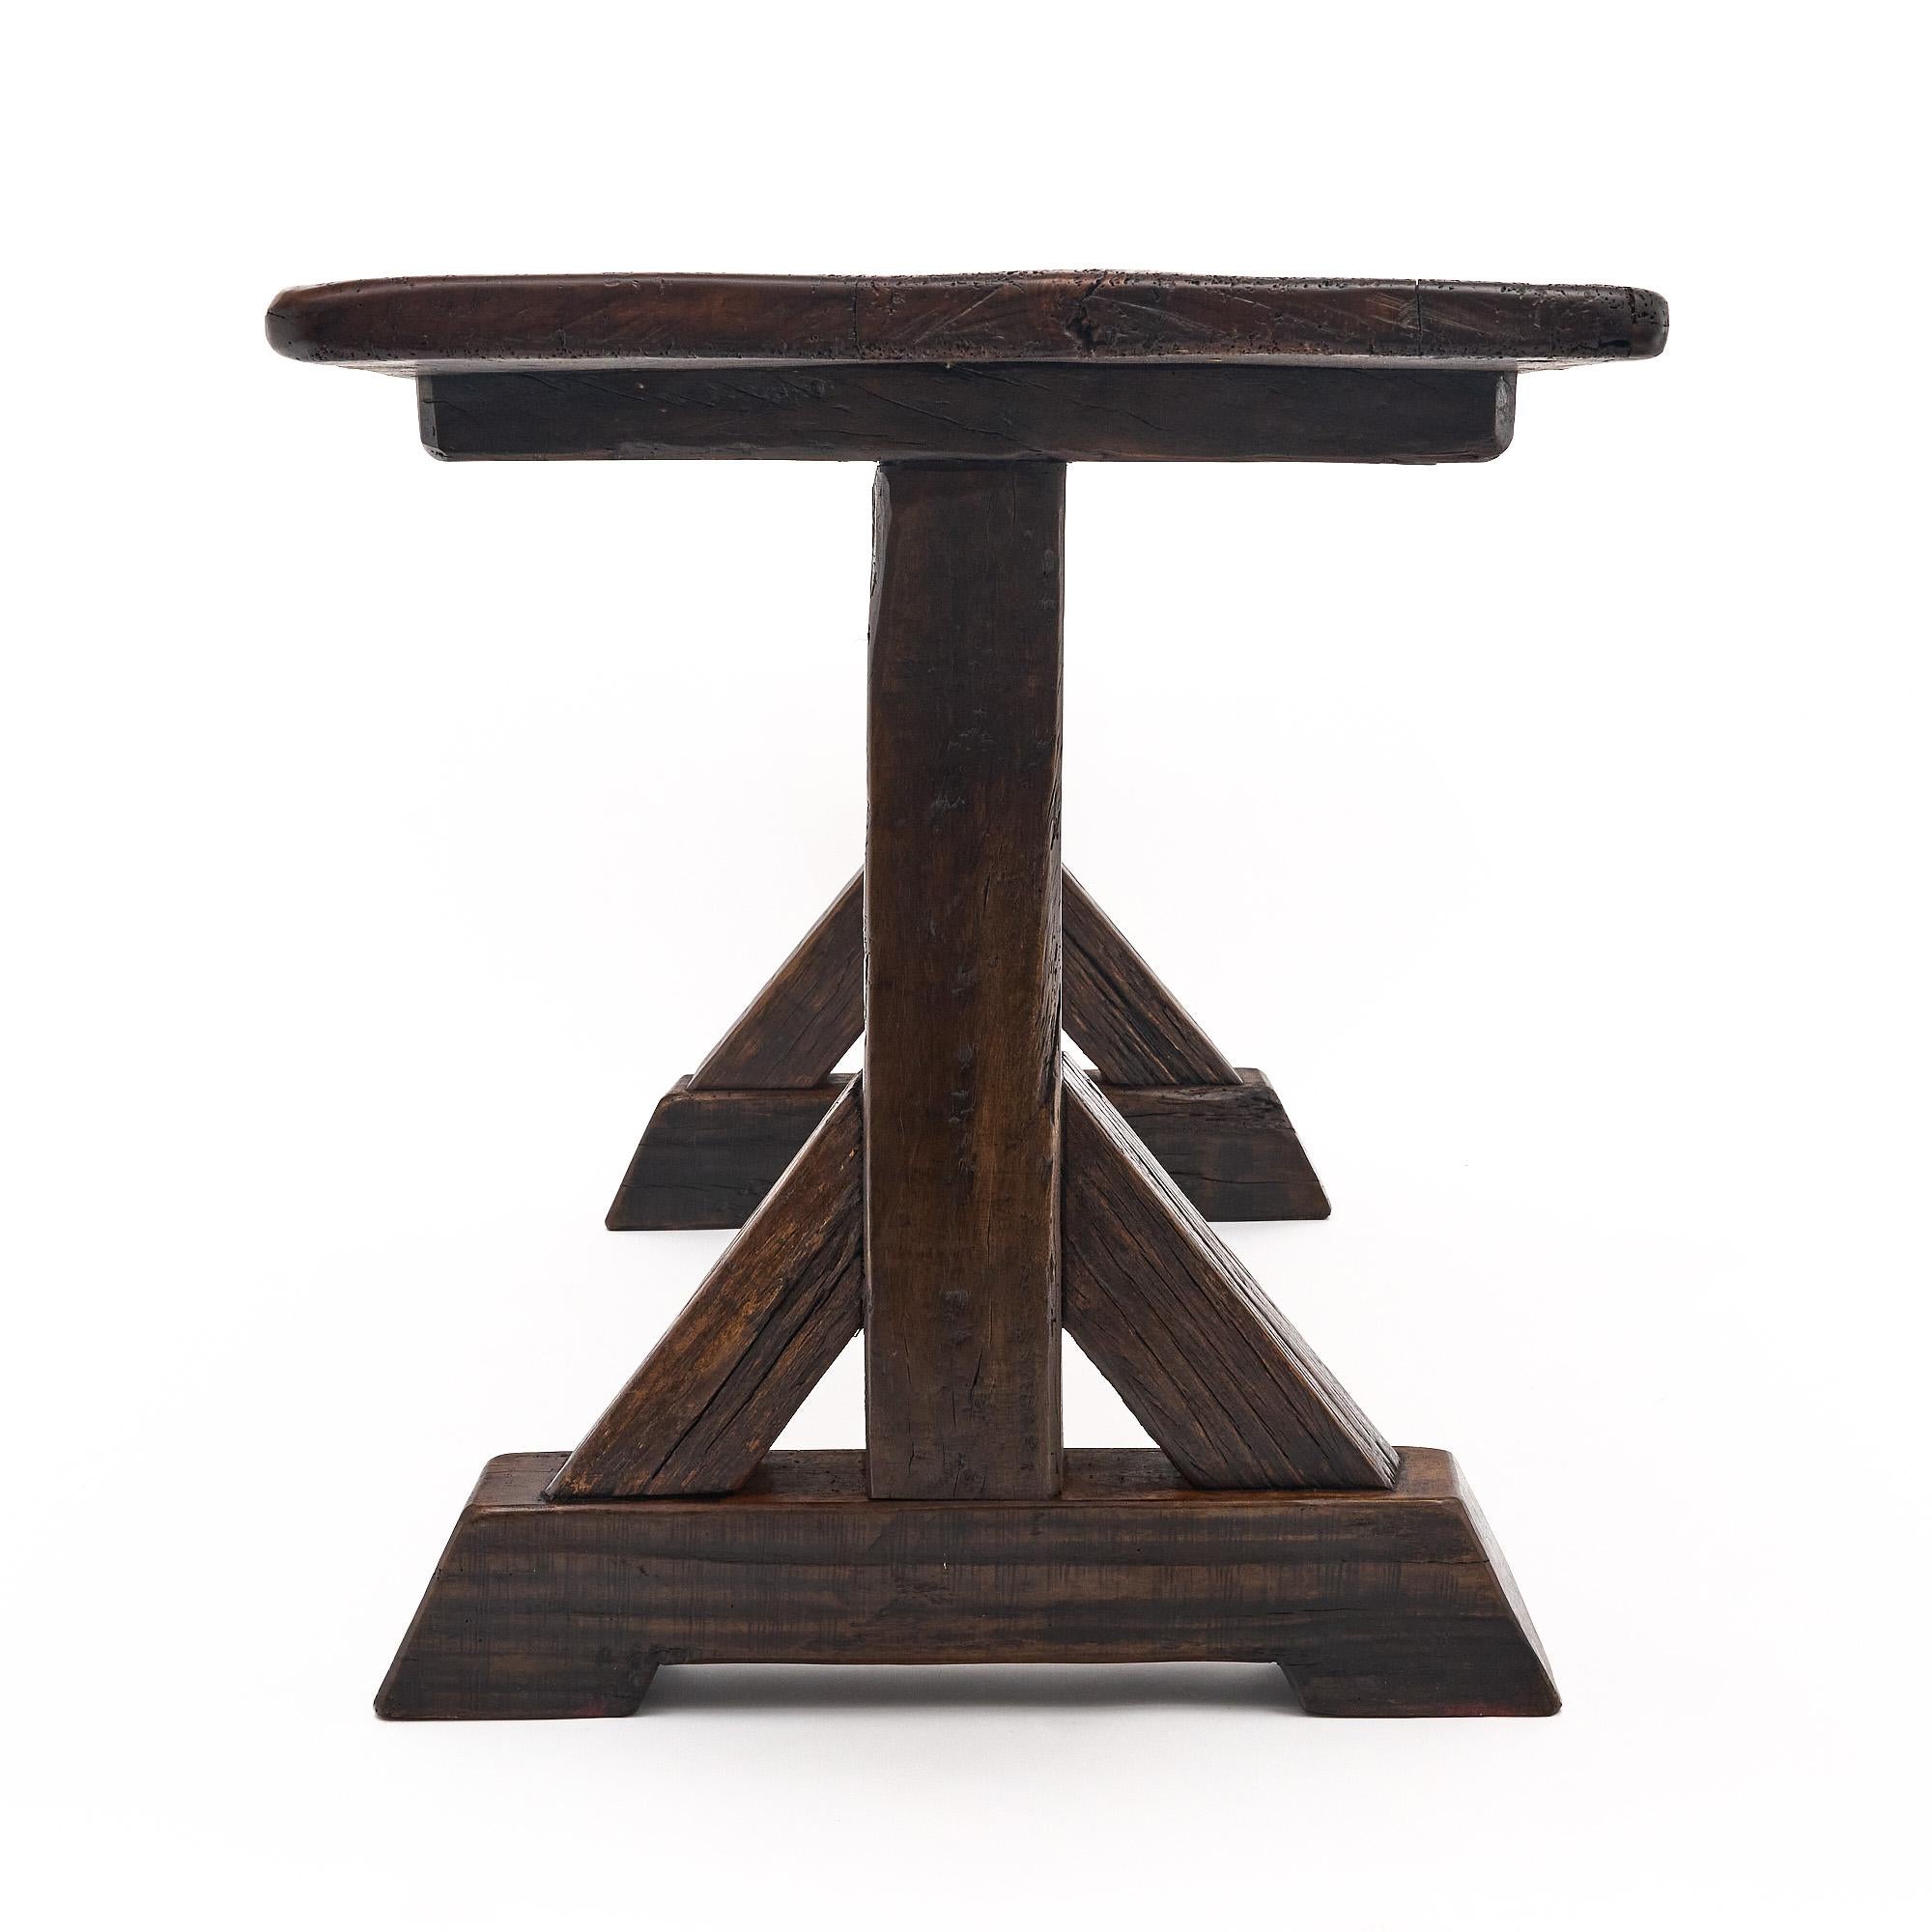 Farm table, from Spain, made of patinated chestnut. The Antique console features a single 18th-Century plank top on a reconstructed antique base of reclaimed beam.
